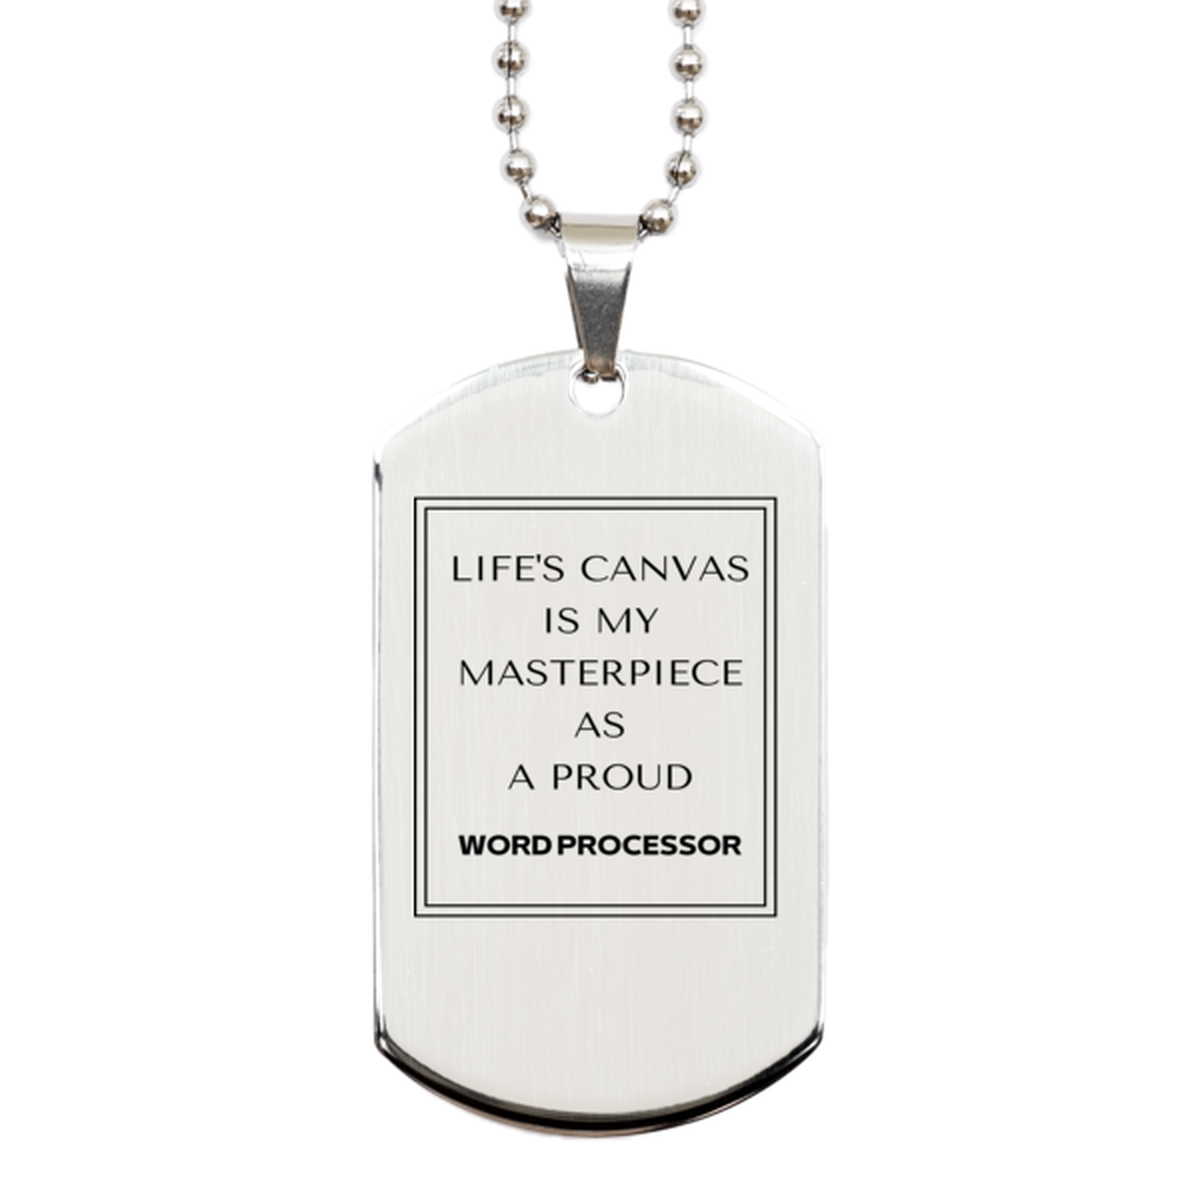 Proud Word Processor Gifts, Life's canvas is my masterpiece, Epic Birthday Christmas Unique Silver Dog Tag For Word Processor, Coworkers, Men, Women, Friends